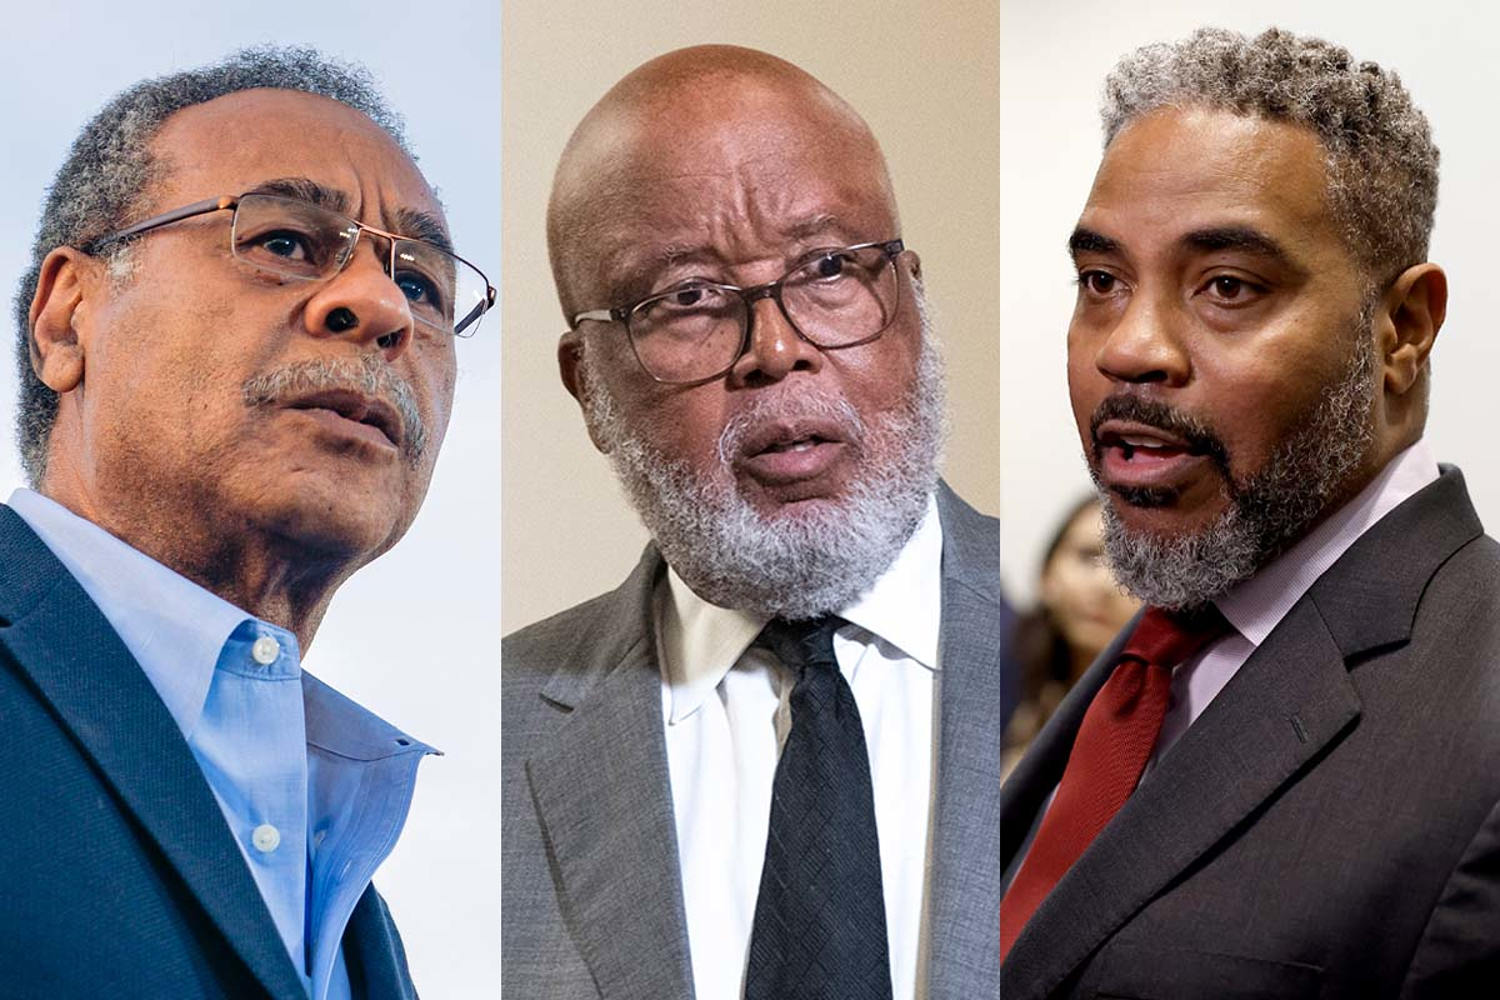 Black Caucus largely sticks by Biden, but worries grow about whether his candidacy can survive